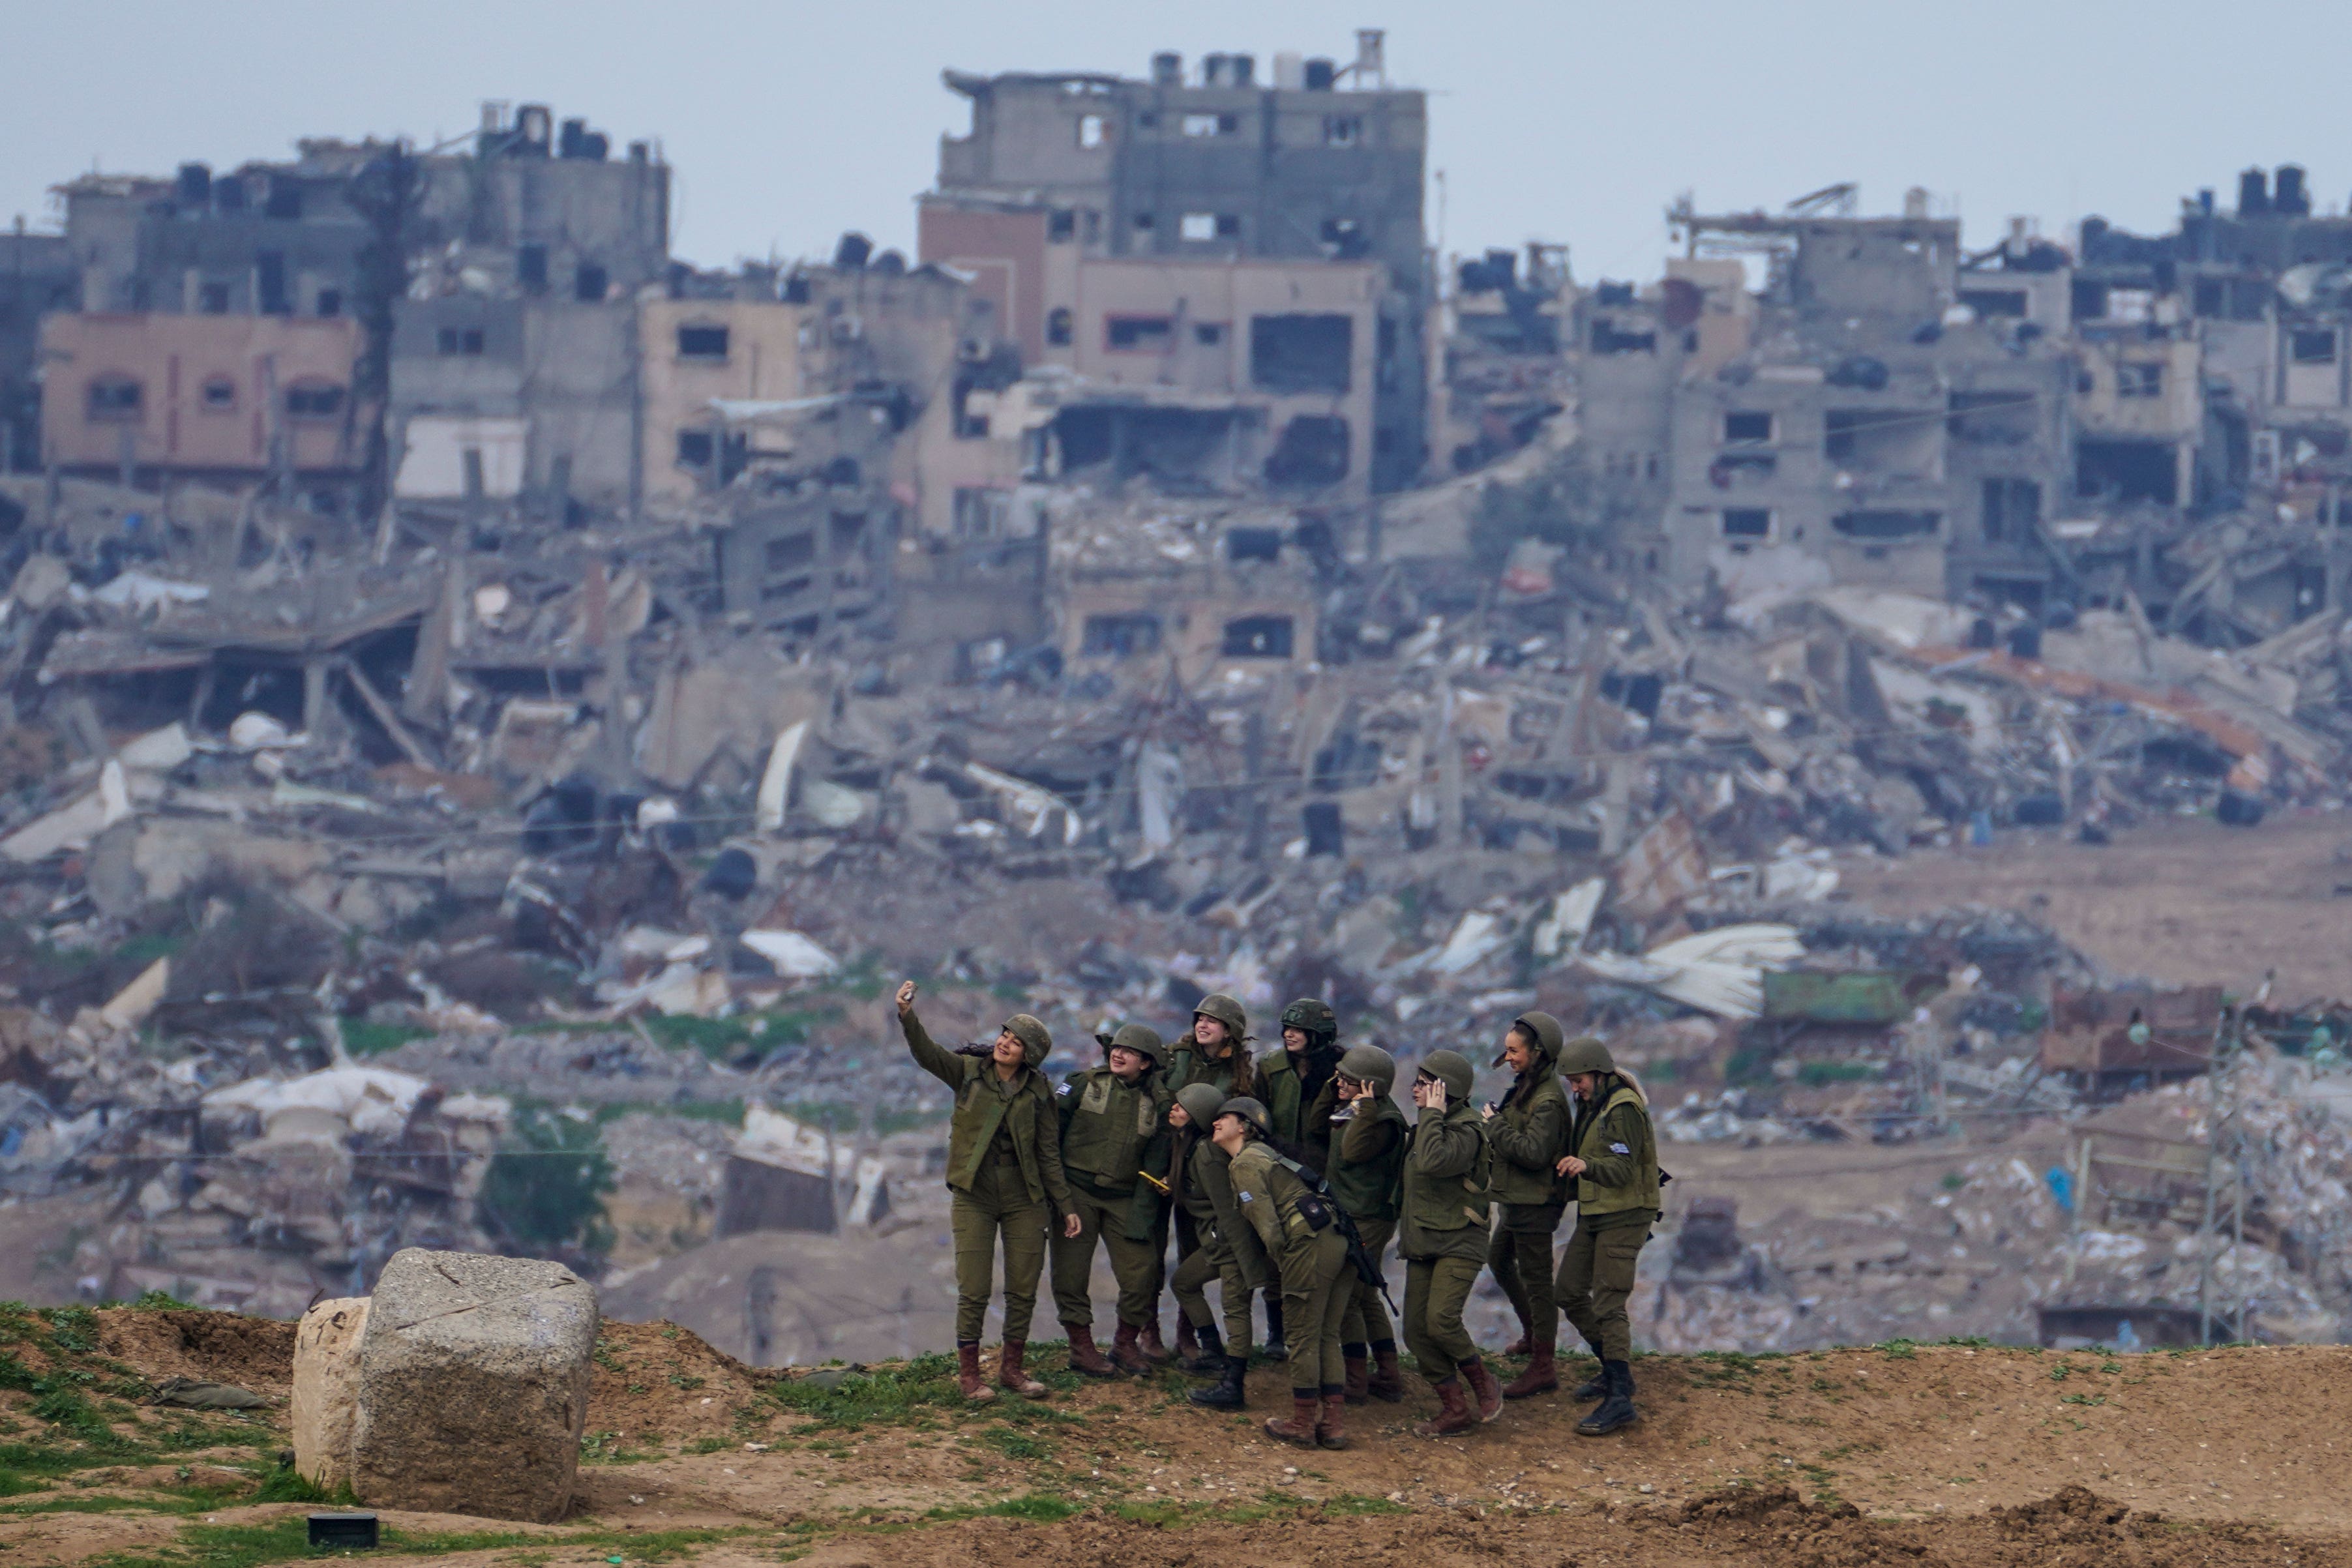 MPs will vote on calls for an immediate ceasefire in Gaza on Wednesday/ (AP Photo/Tsafrir Abayov)